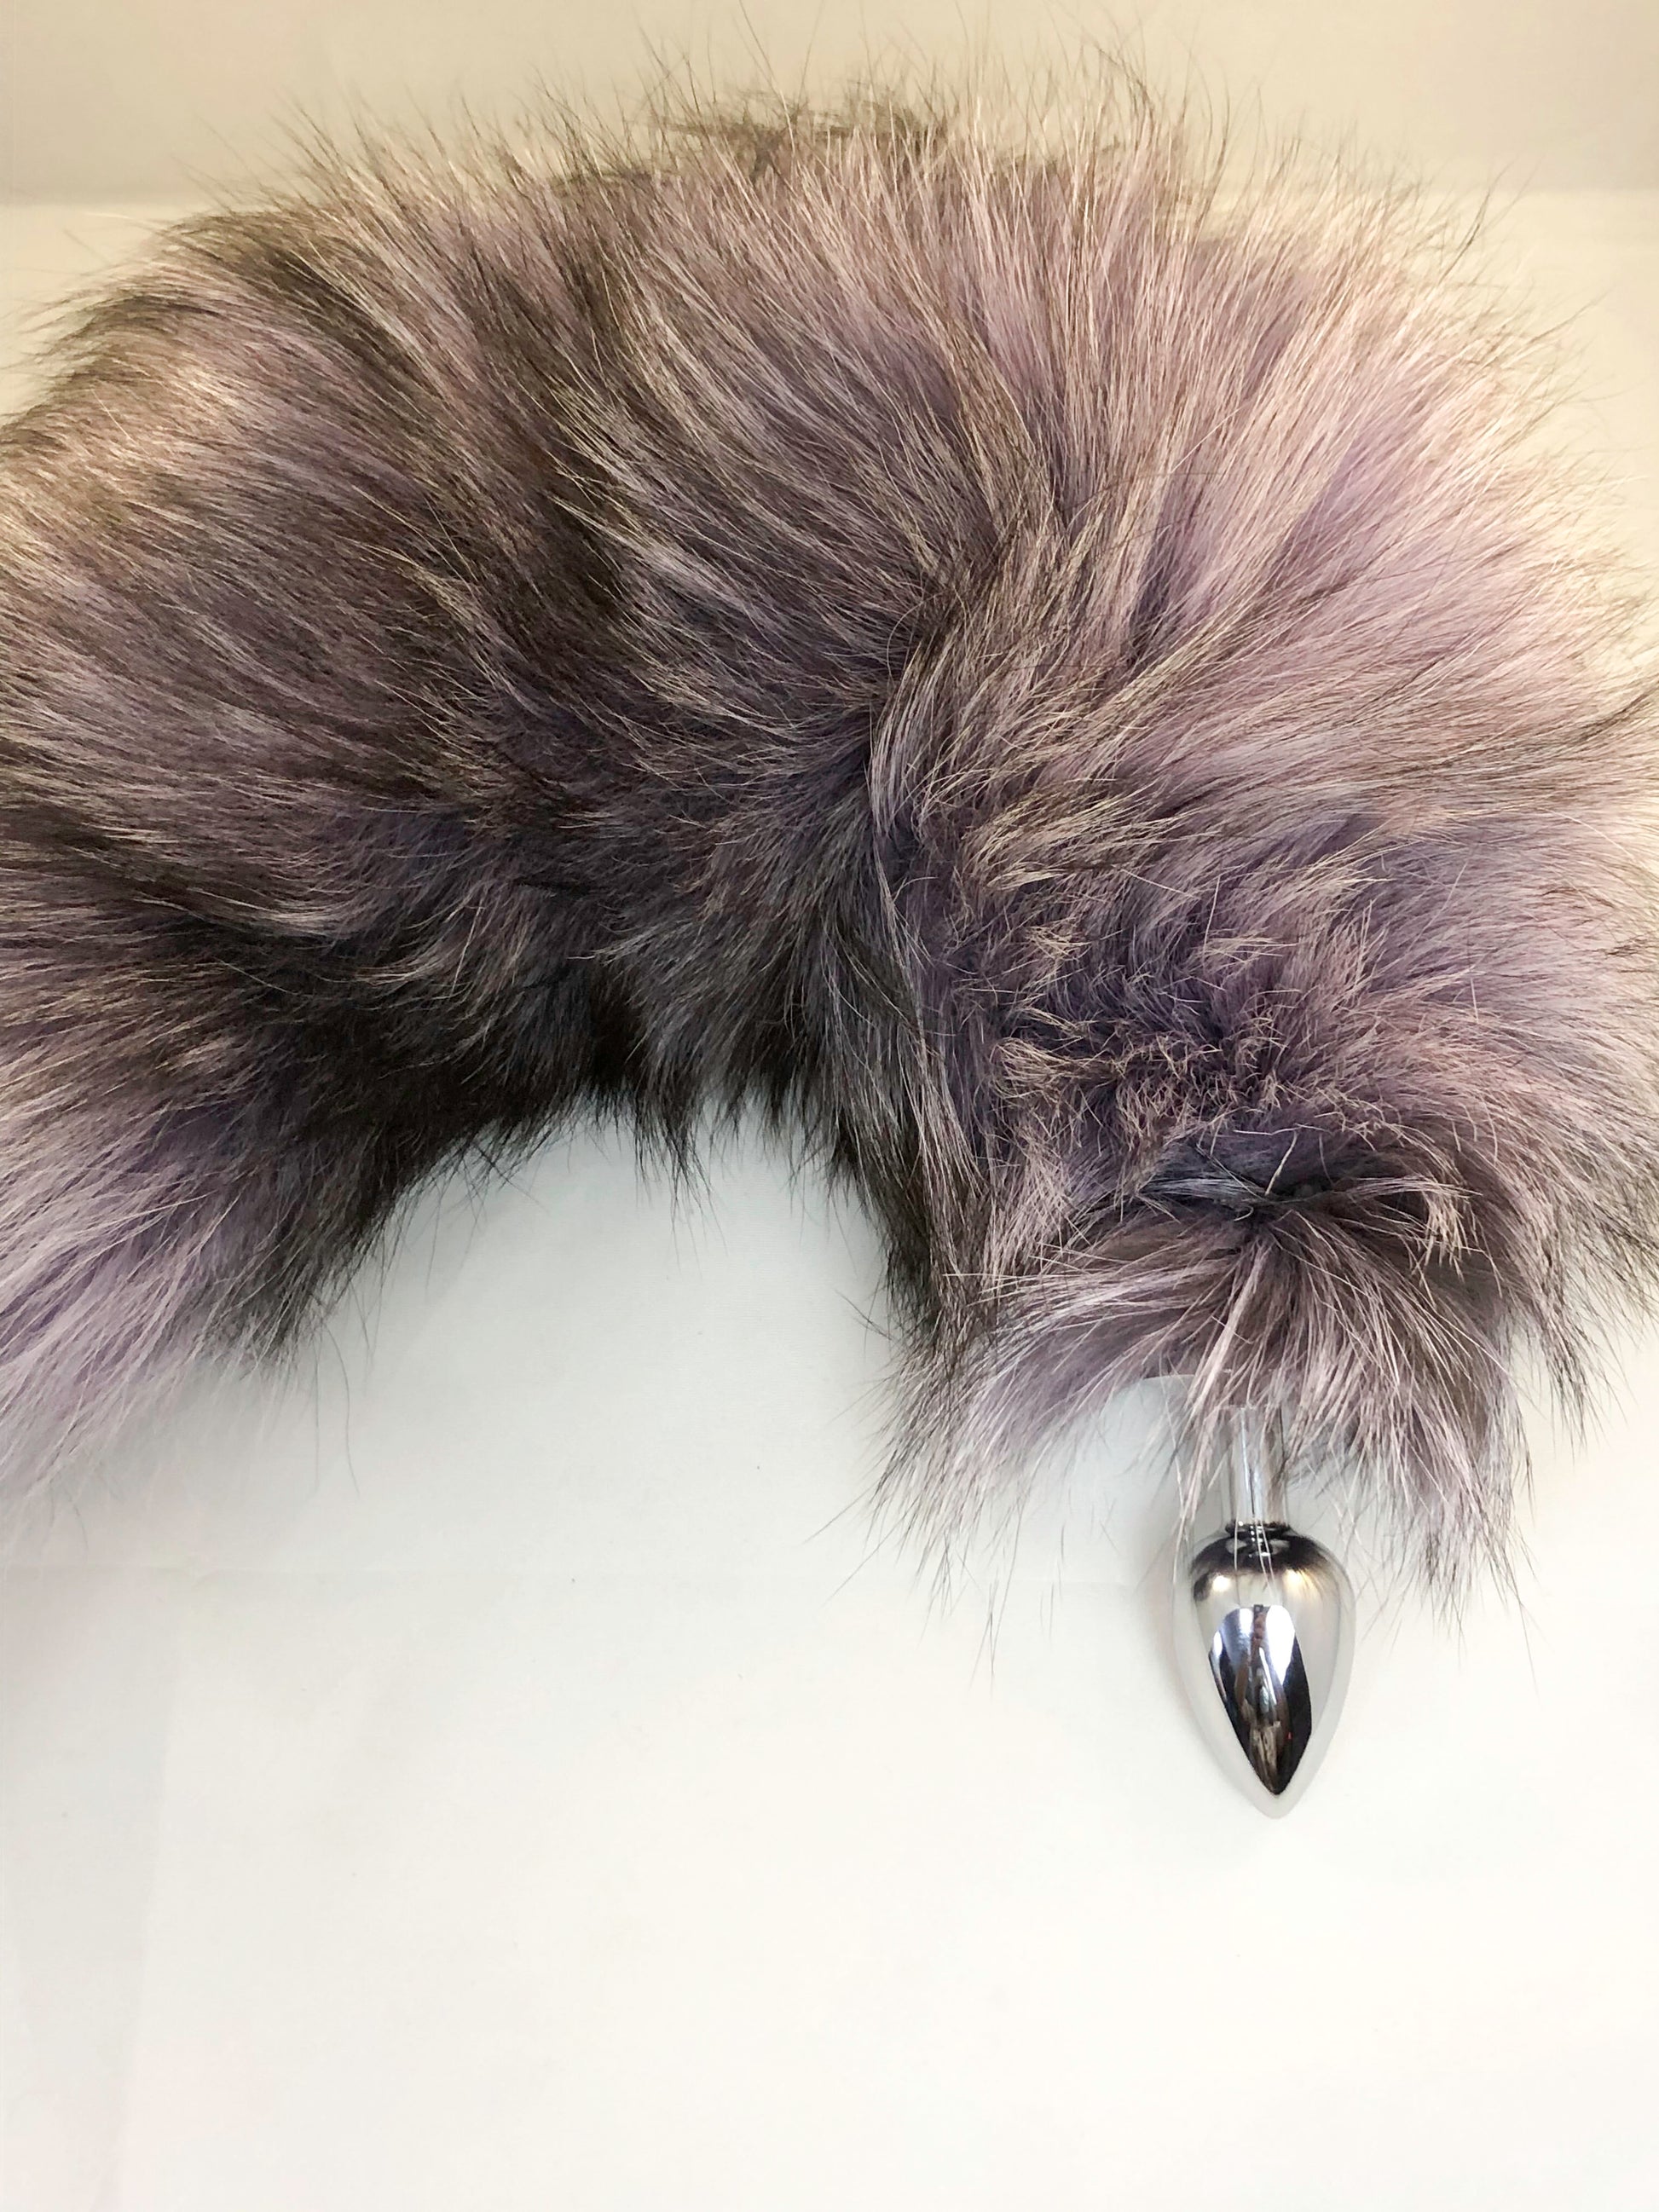 Indigo foxed dyed lavender Interchangeable Tail. 